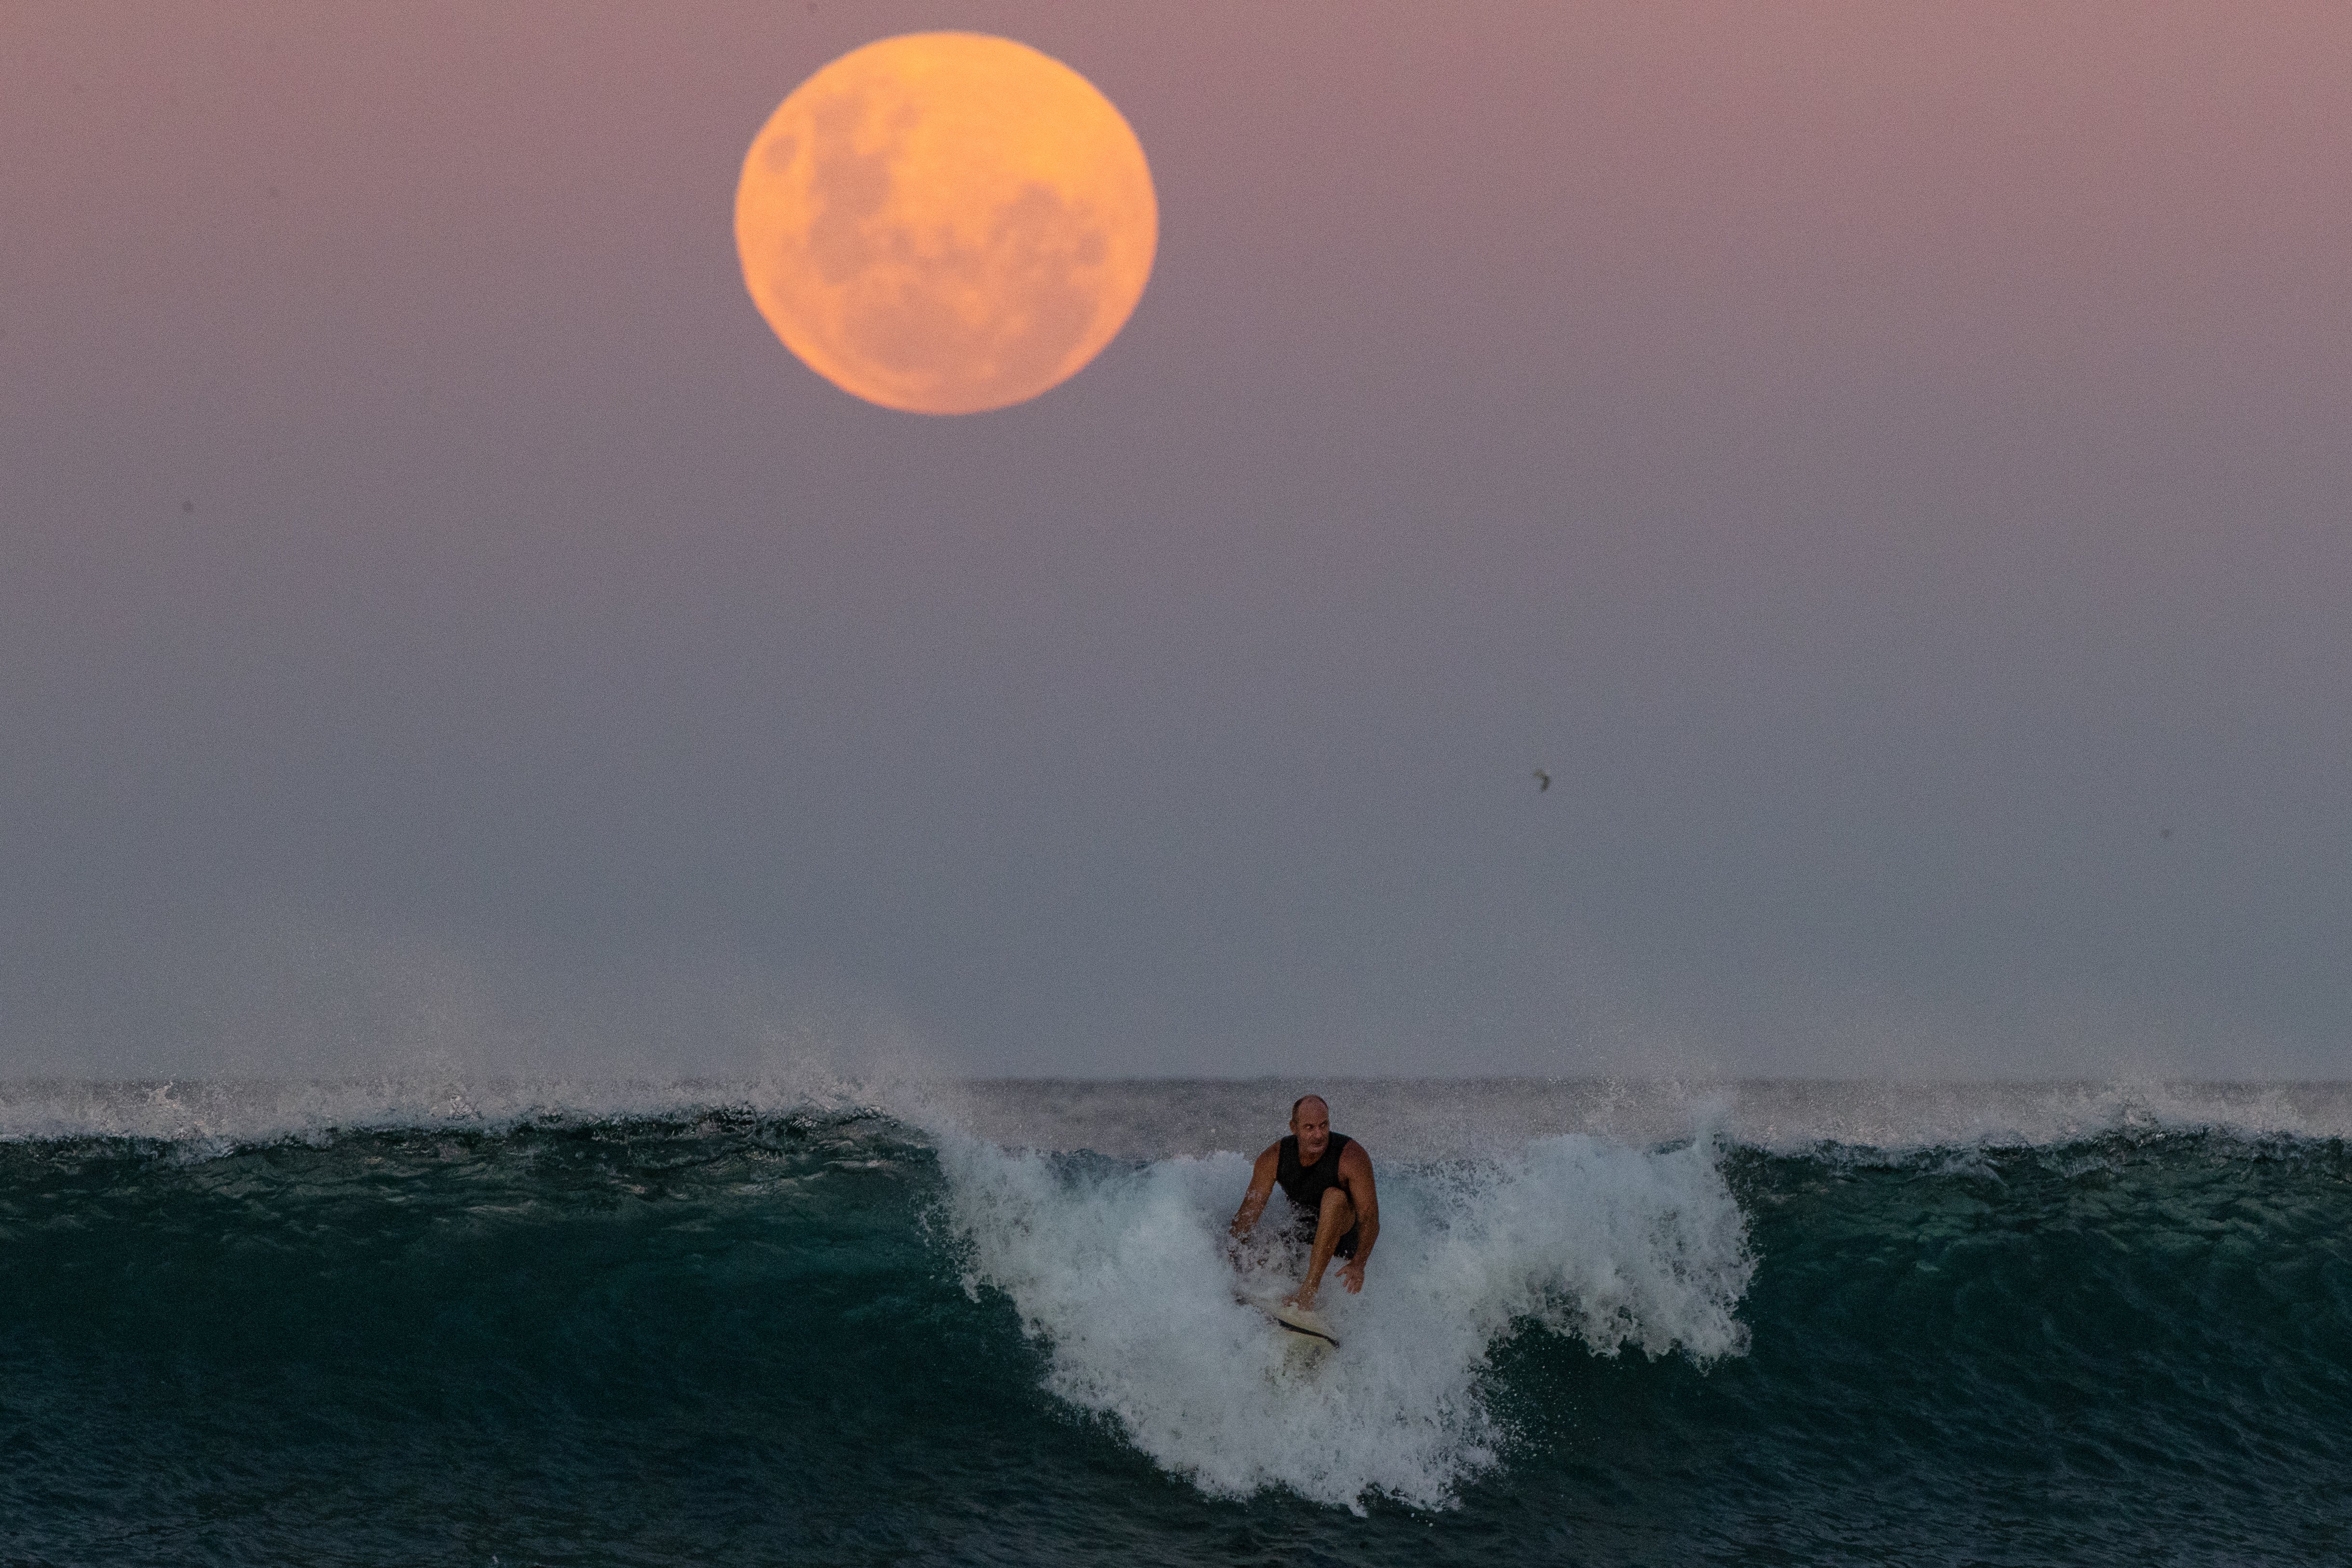 A surfer rides a wave as a super blood moon rises above the horizon at Manly Beach, Sydney on 26 May, 2021